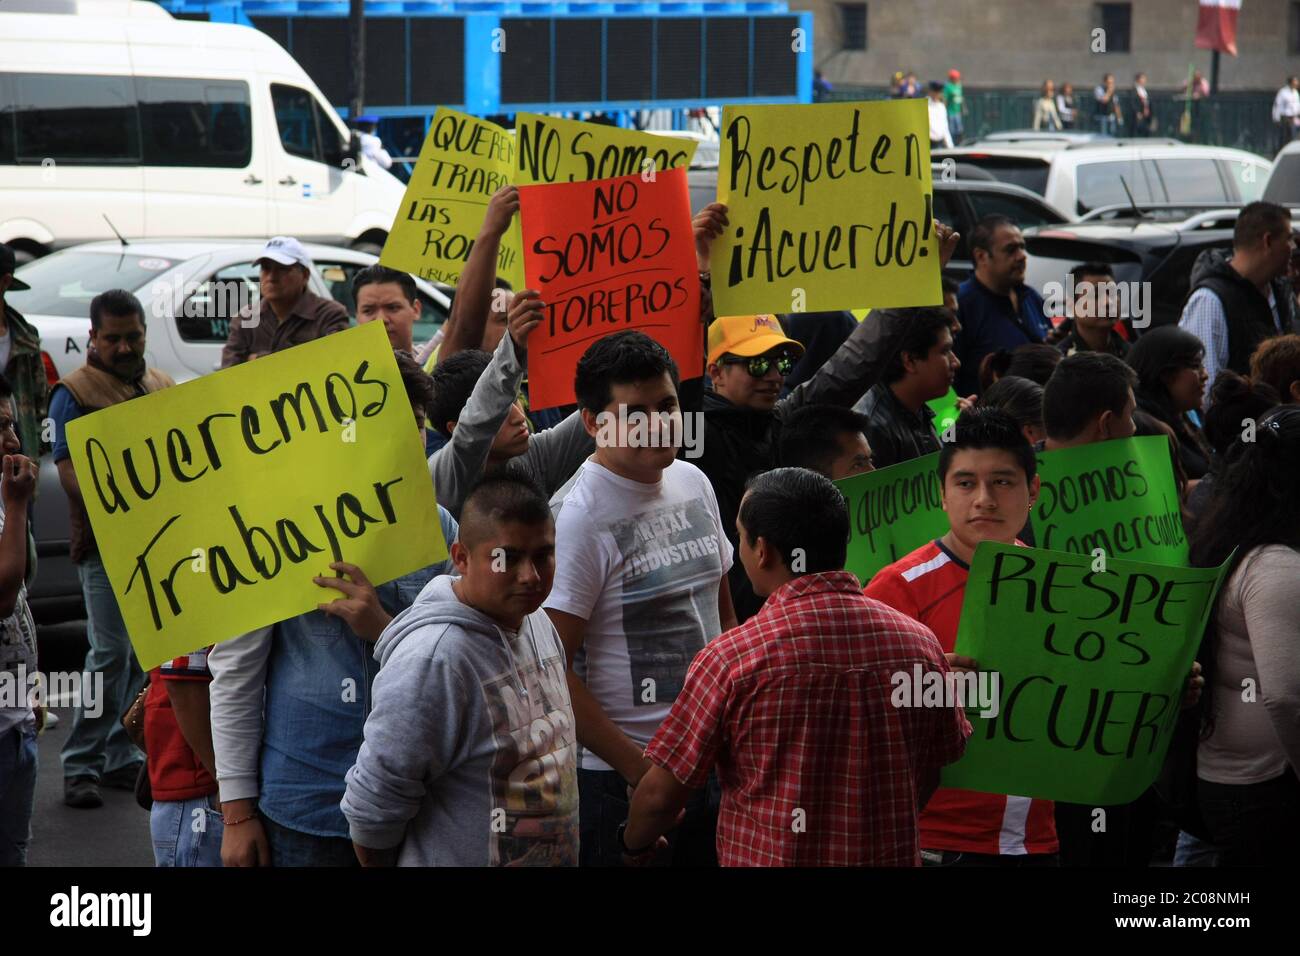 Mexicans protesting peacefully in the central square of Mexico City about jobs and wanting to work - colourful placards Stock Photo